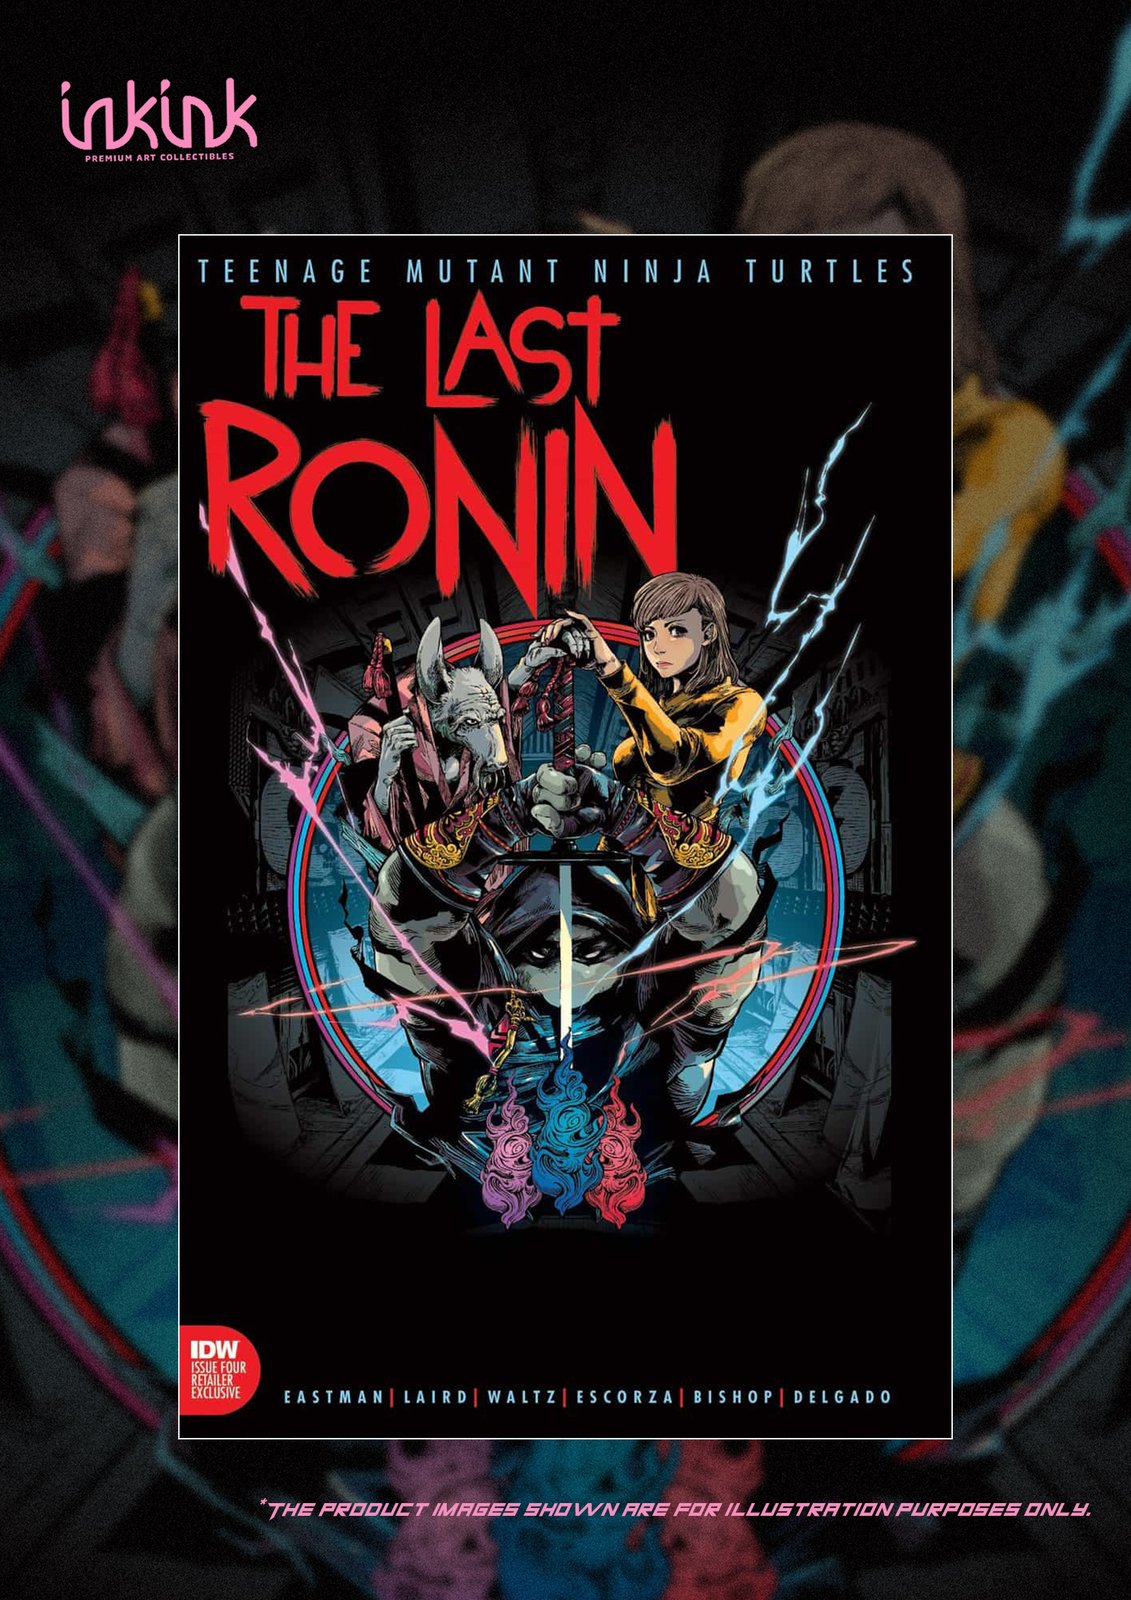 PRE-ORDER : The Last Ronin #4 Exclusive Variant Cover by JB Style. BUNDLE!  (STRICT LIMIT 2 SETS PER